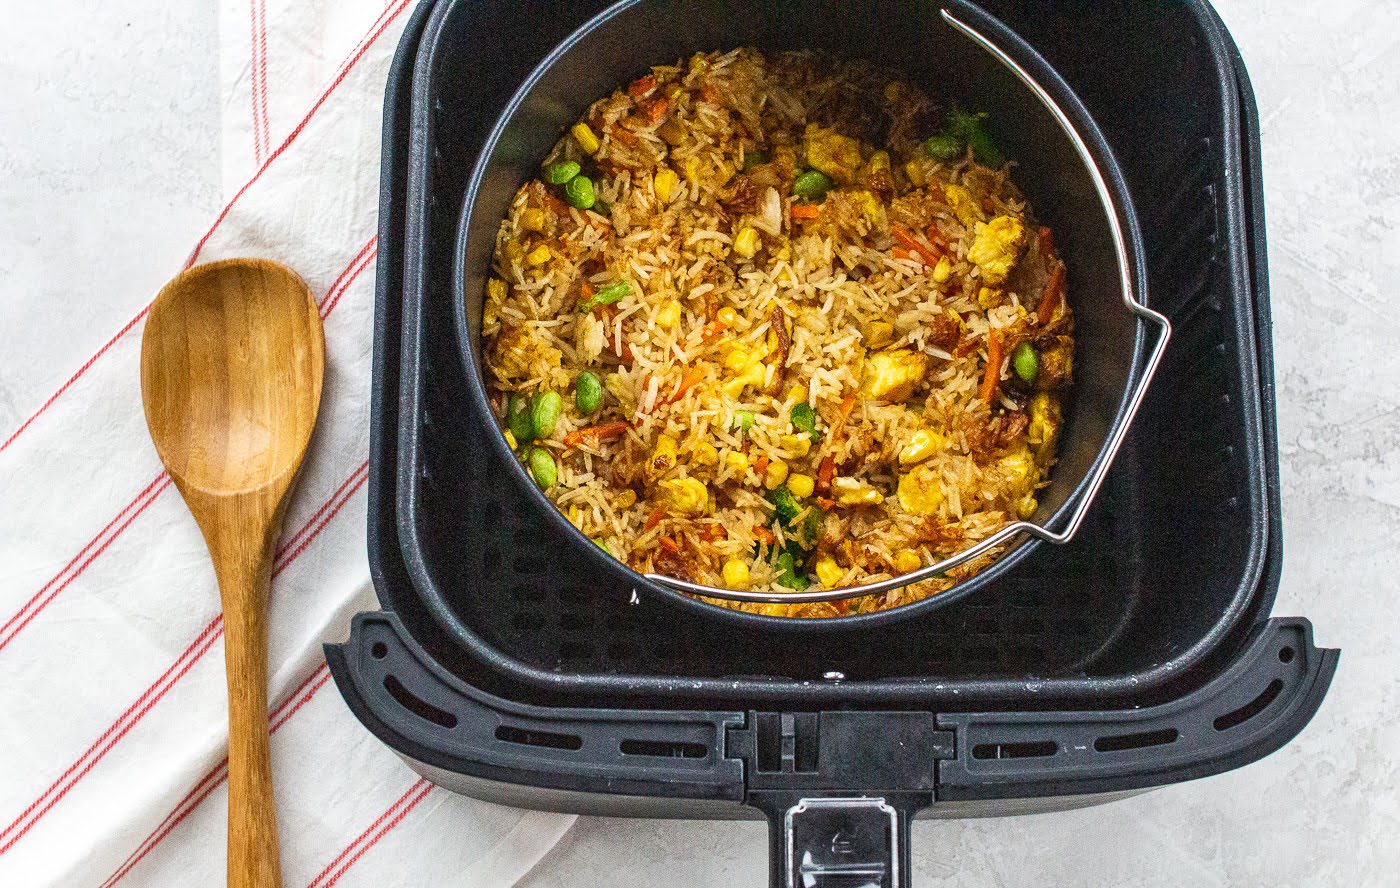 How To Cook Rice In An Air Fryer